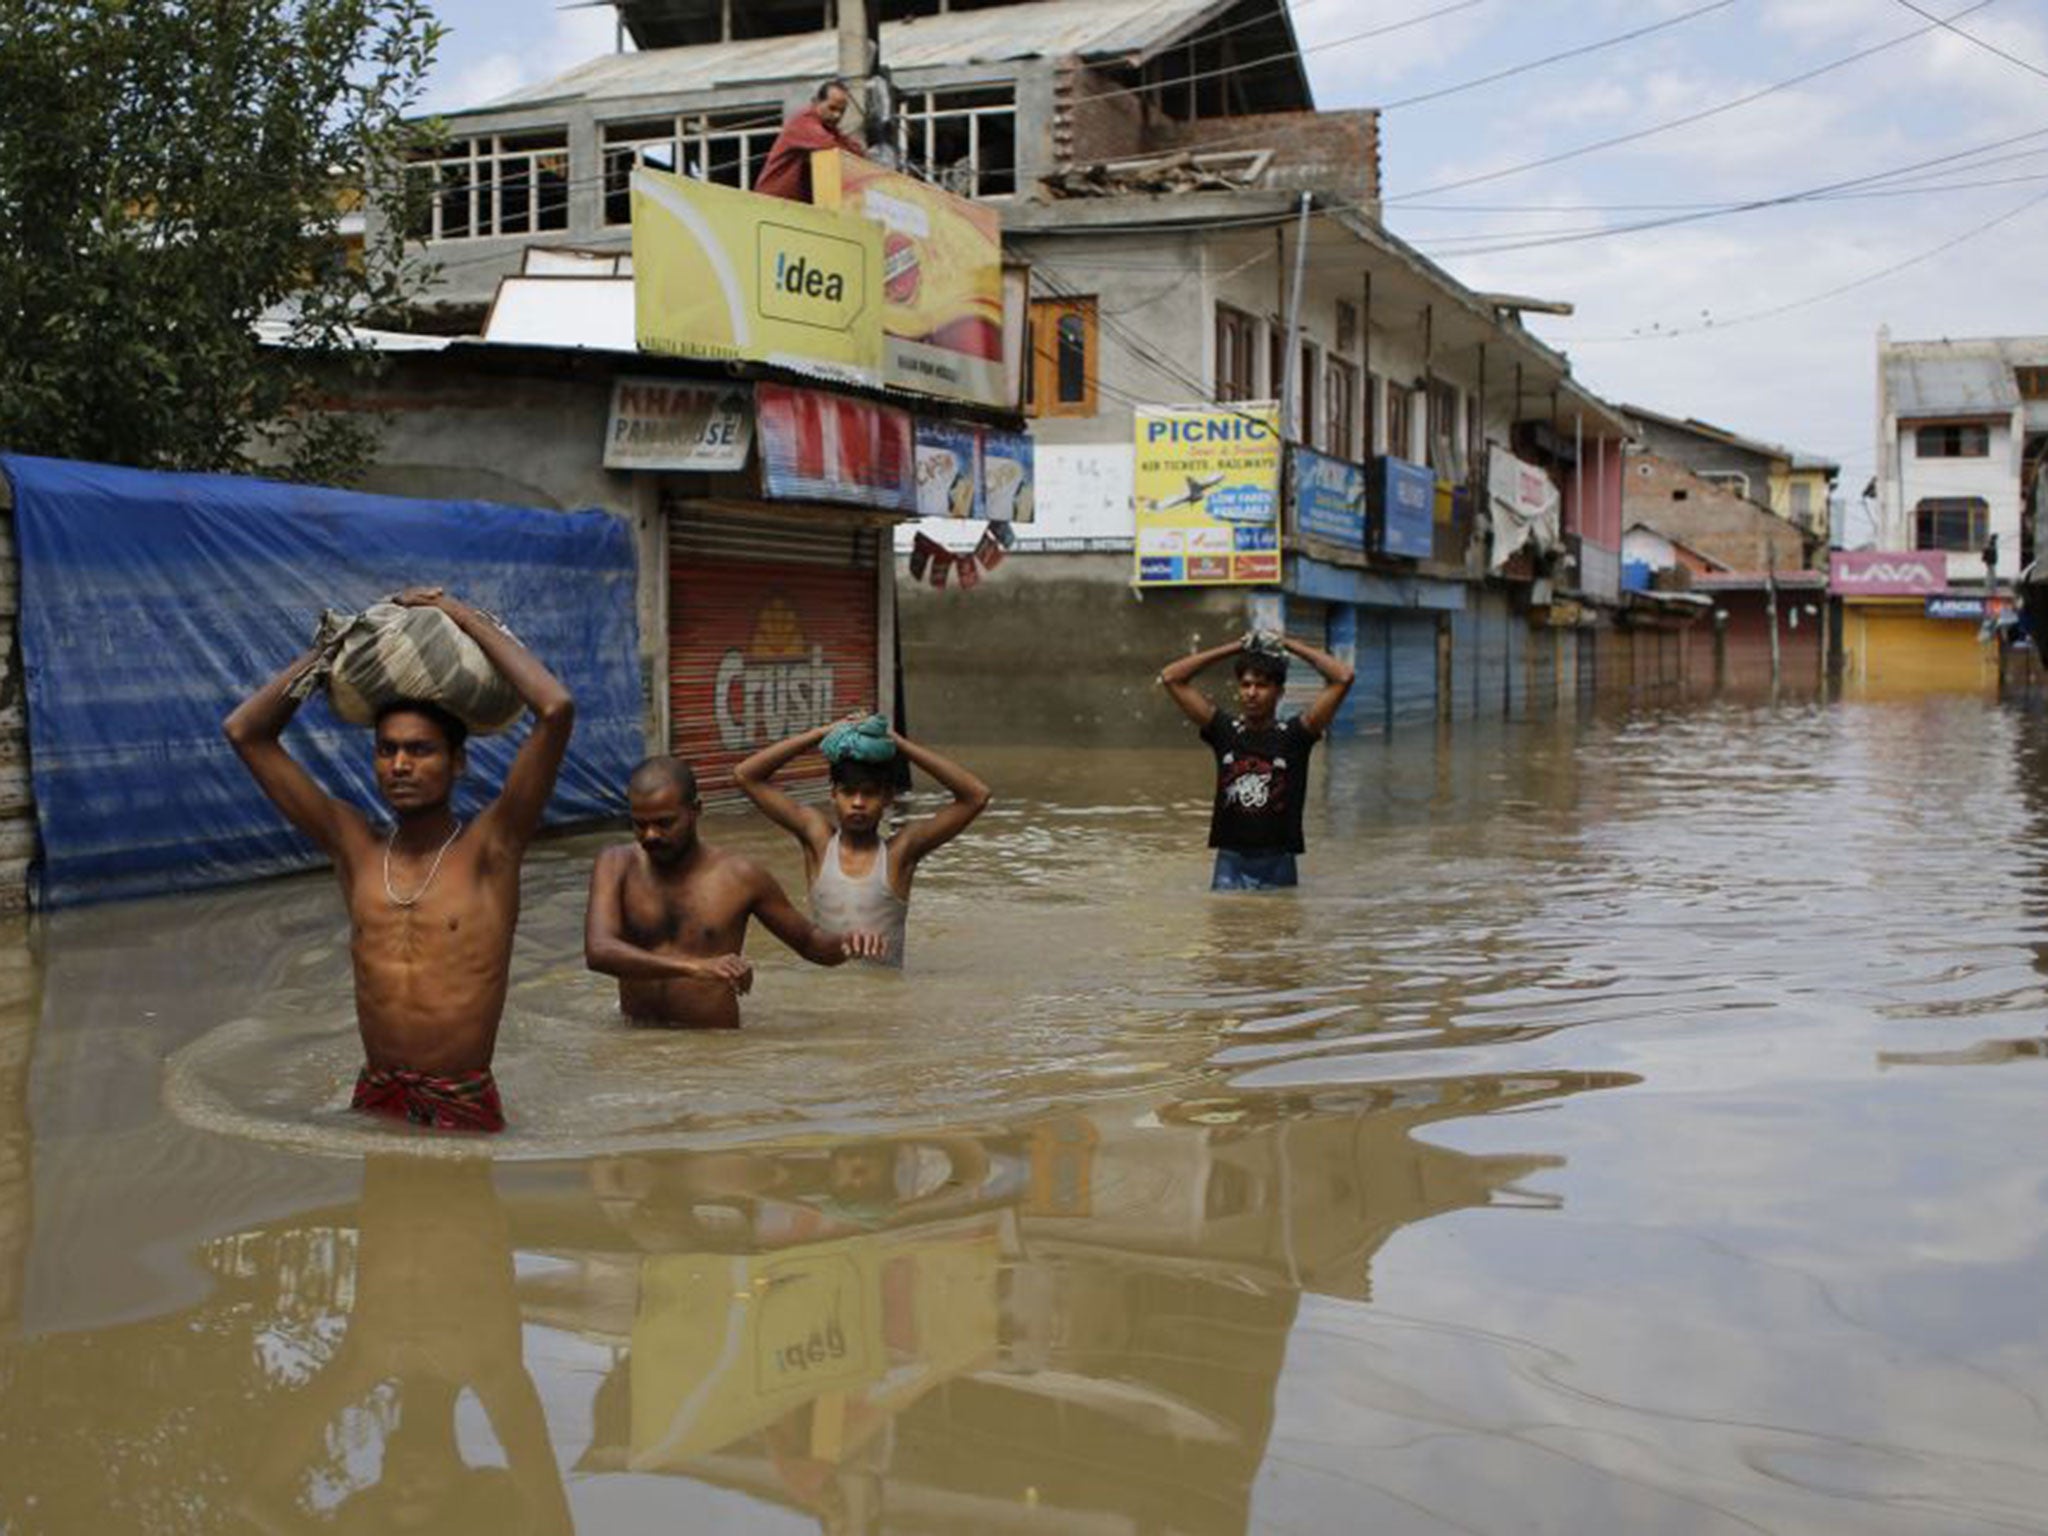 Indian migrant workers wade through receding flood waters with their belongings on their heads in Srinagar. Hundreds of people have been killed and tens of thousands are homeless